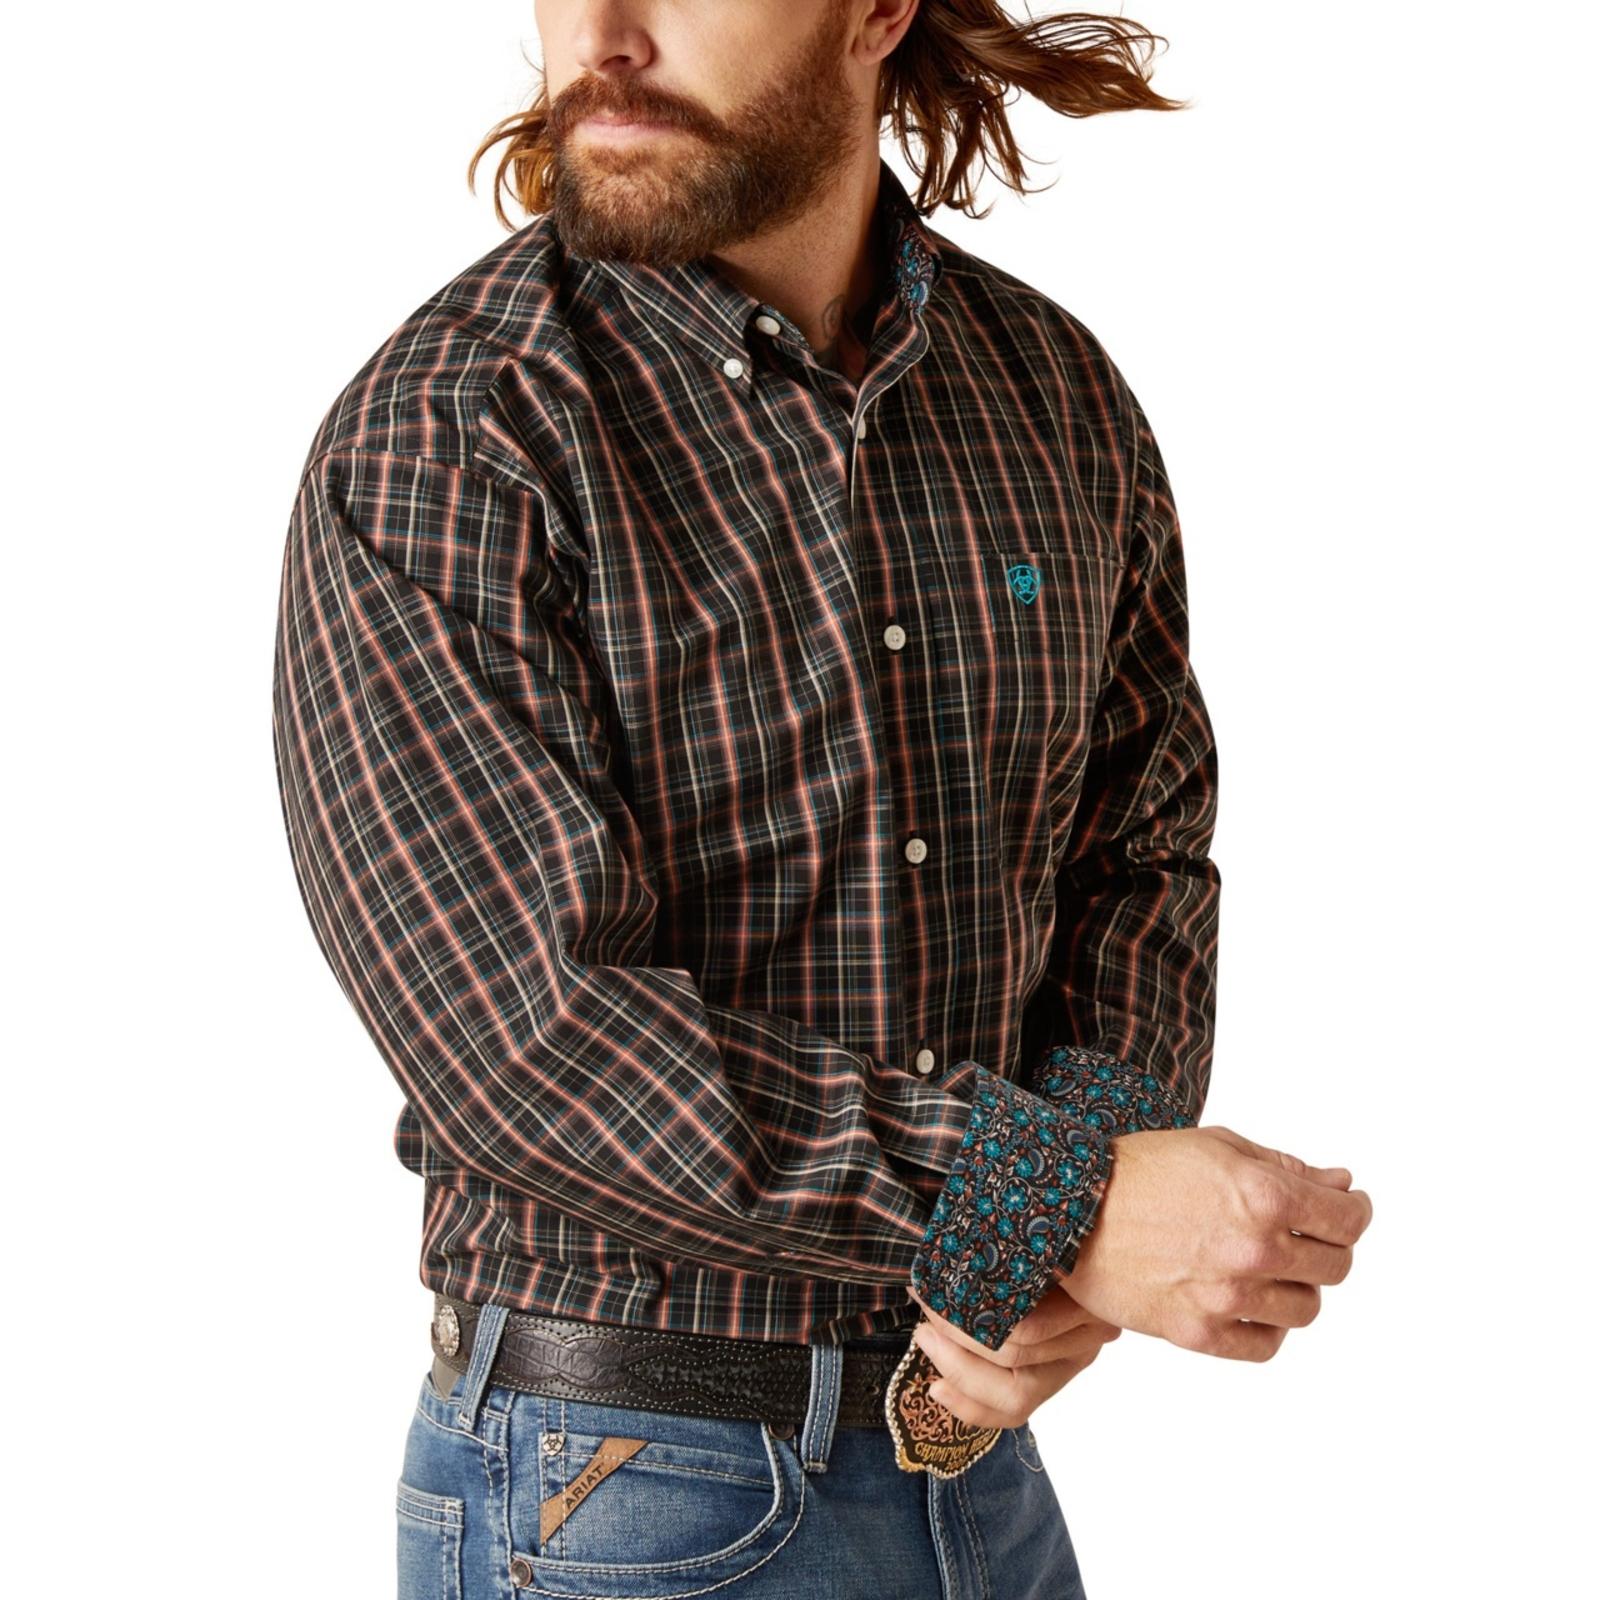 Ariat Men's Wrinkle Free Gaven Classic Fit Shirt details